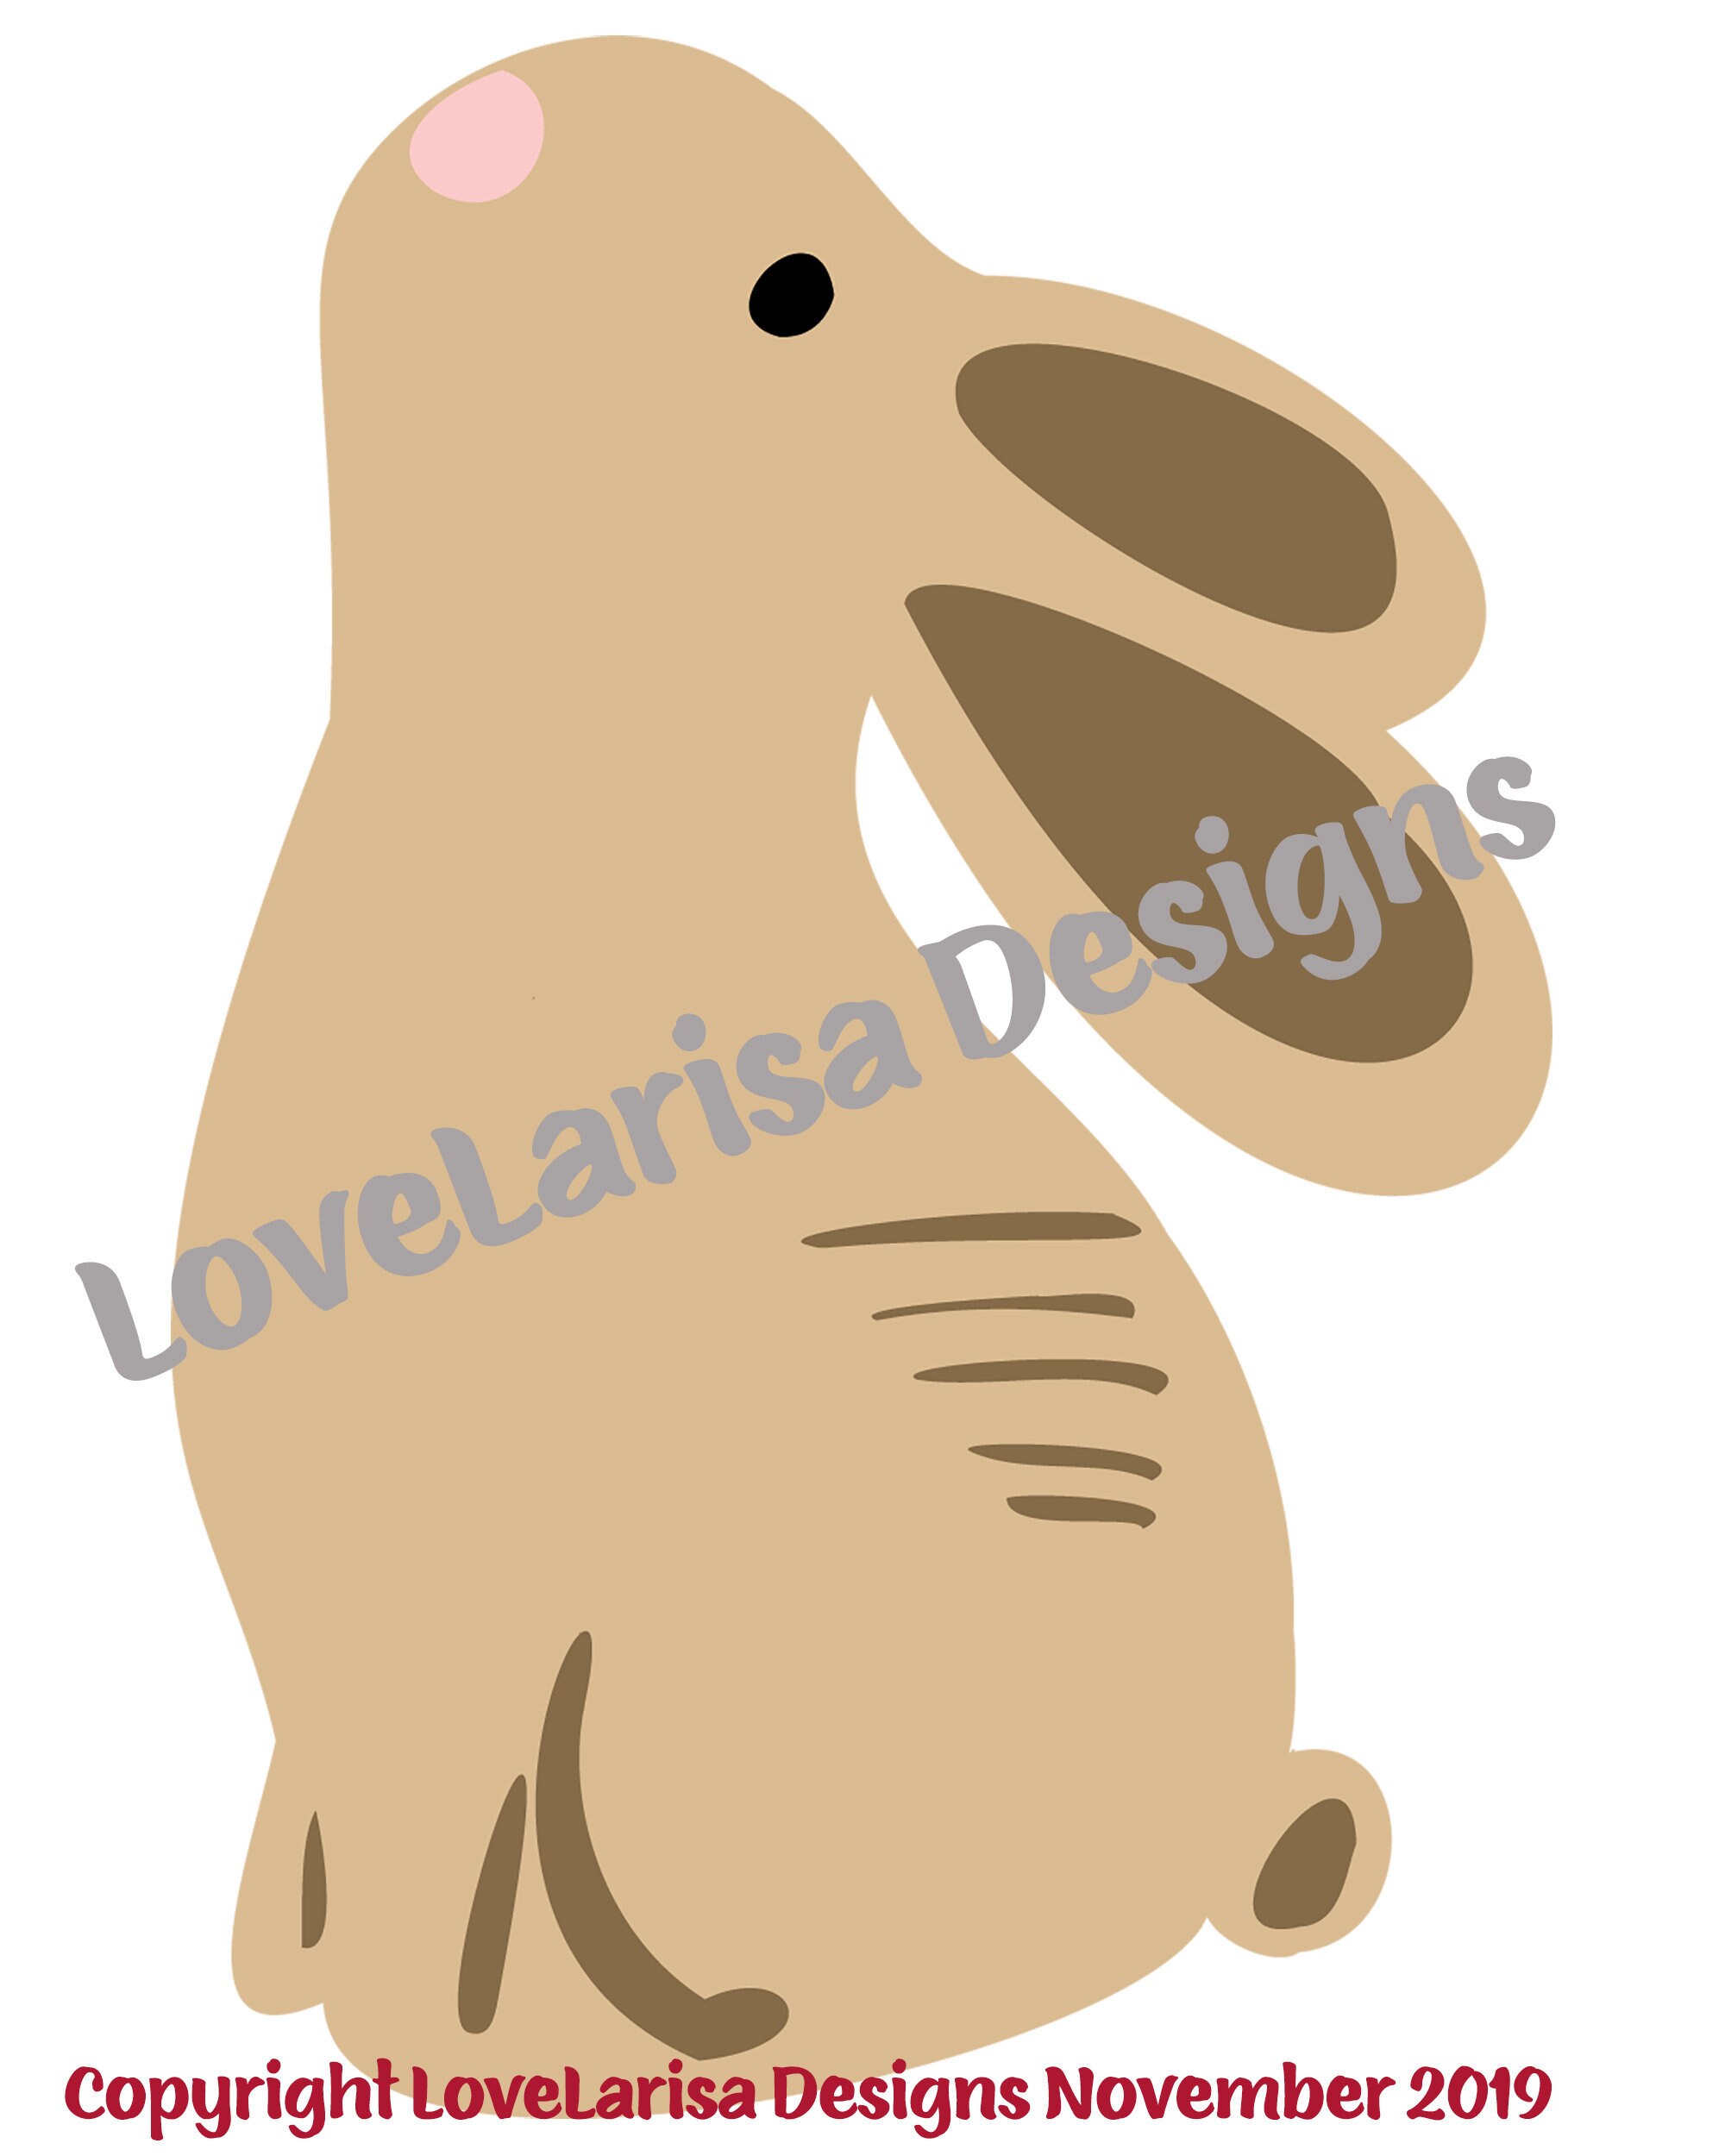 Download Bunny Layered Svg Image For Cricut Machines Etsy